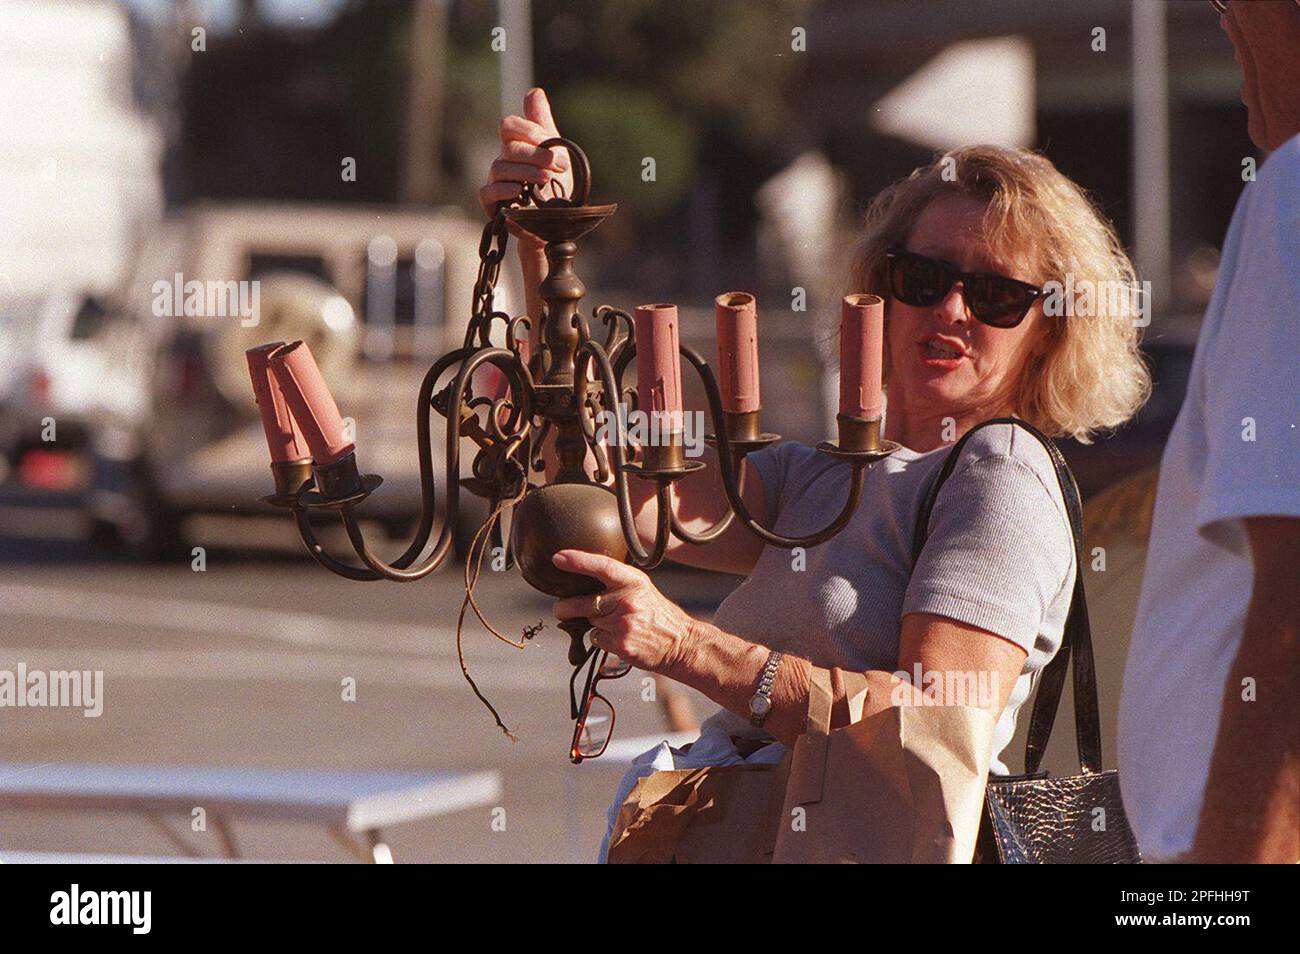 https://c8.alamy.com/comp/2PFHH9T/flea-4c02nov97cdls-lorraine-petersen-of-sebastopol-inspects-a-brass-chandelier-as-she-talks-with-the-owner-of-the-flea-market-booth-joe-henderson-it-was-priced-at-25-henderson-said-that-he-was-one-of-the-first-renters-at-the-flea-market-but-only-comes-about-once-a-month-it-keeps-you-from-getting-old-get-out-and-enjoy-life-come-on-out-and-mingle-with-the-people-henderson-explained-were-all-reasons-he-enjoyed-occasionally-selling-at-the-market-photo-by-lea-suzuki-lea-suzukisan-francisco-chronicle-via-ap-2PFHH9T.jpg